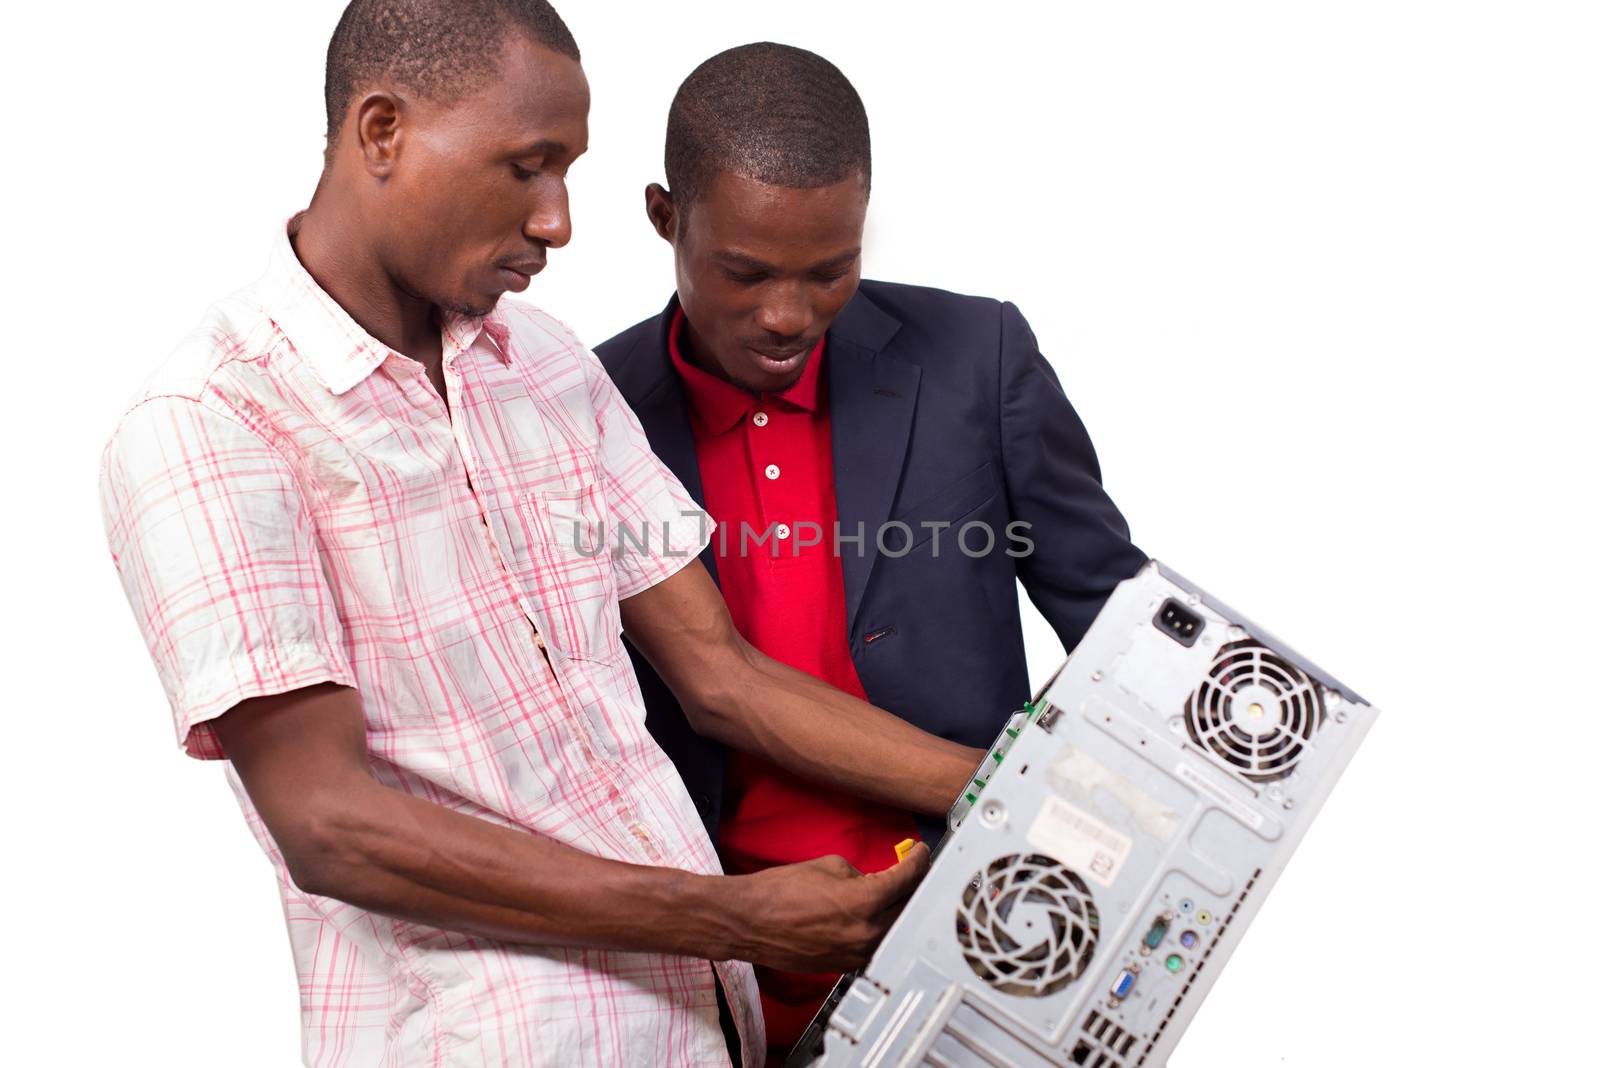 Technician repairing a broken down computer in an office in front of his boss